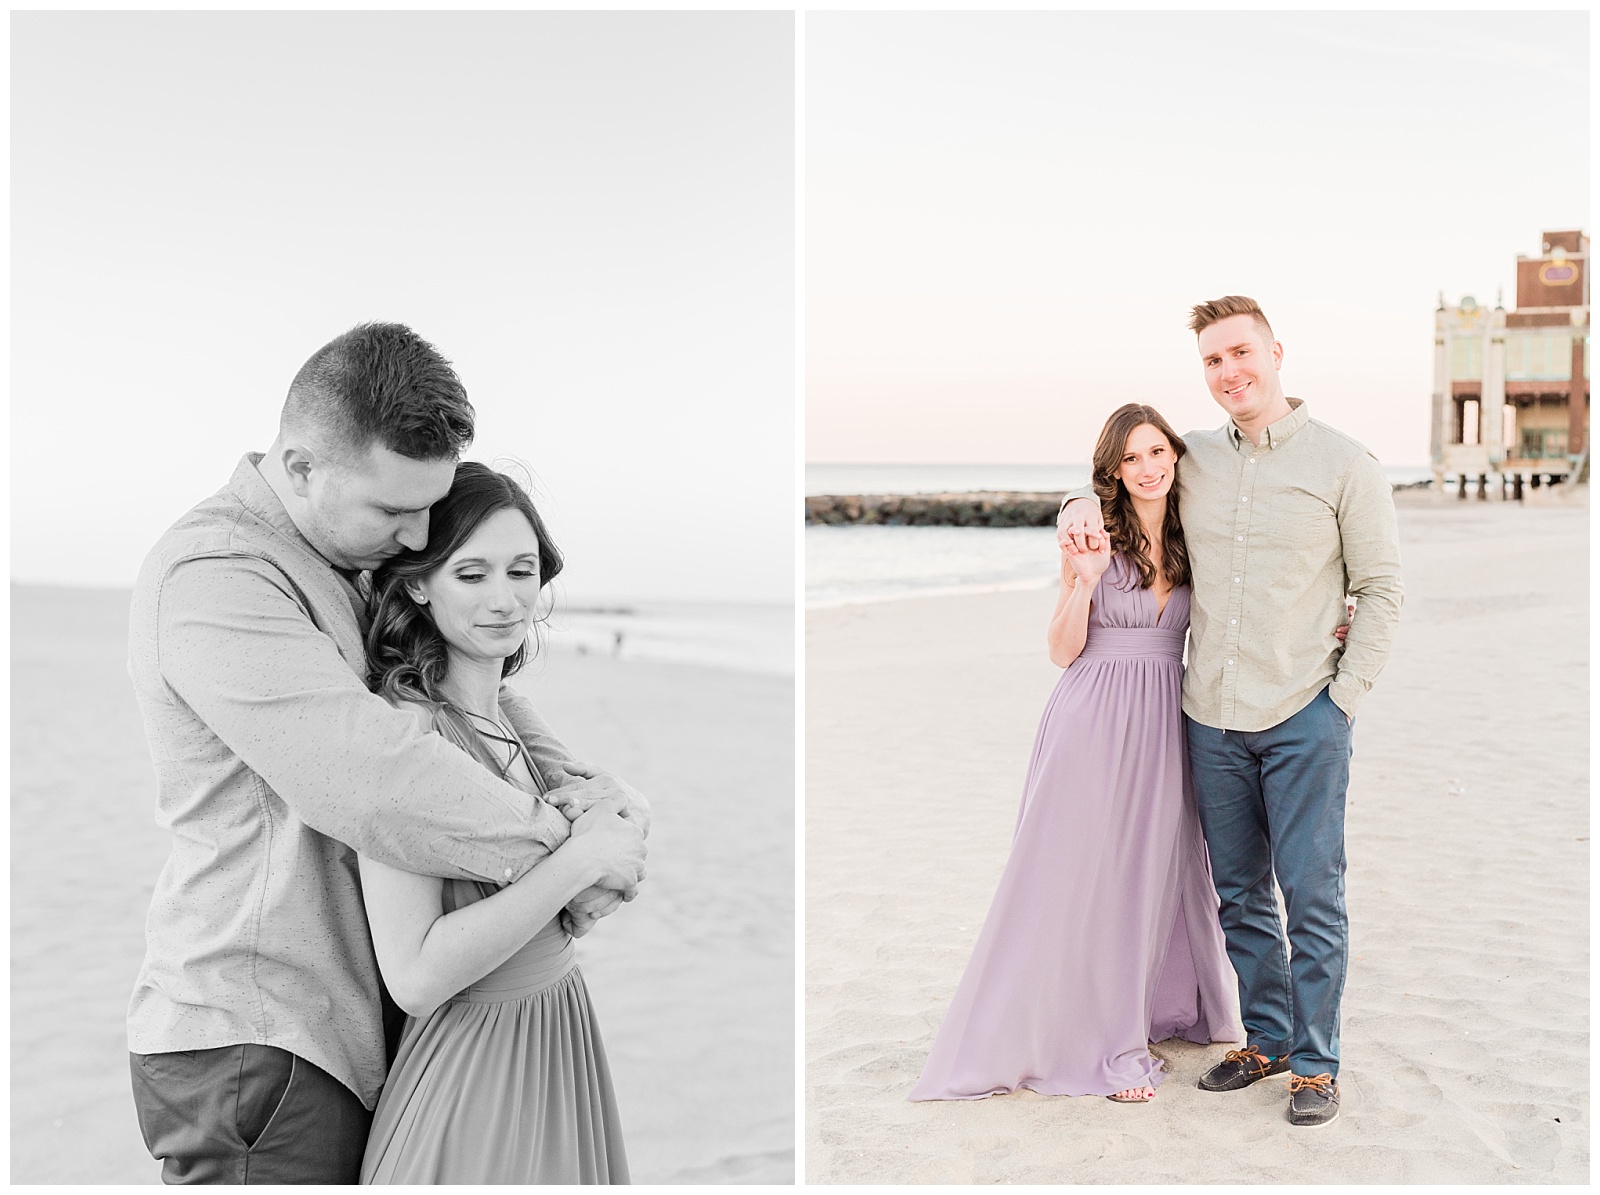 New Jersey, Engagement Session, Asbury Park, NJ, Wedding Photographer, Springtime, Light and Airy, Golden Hour